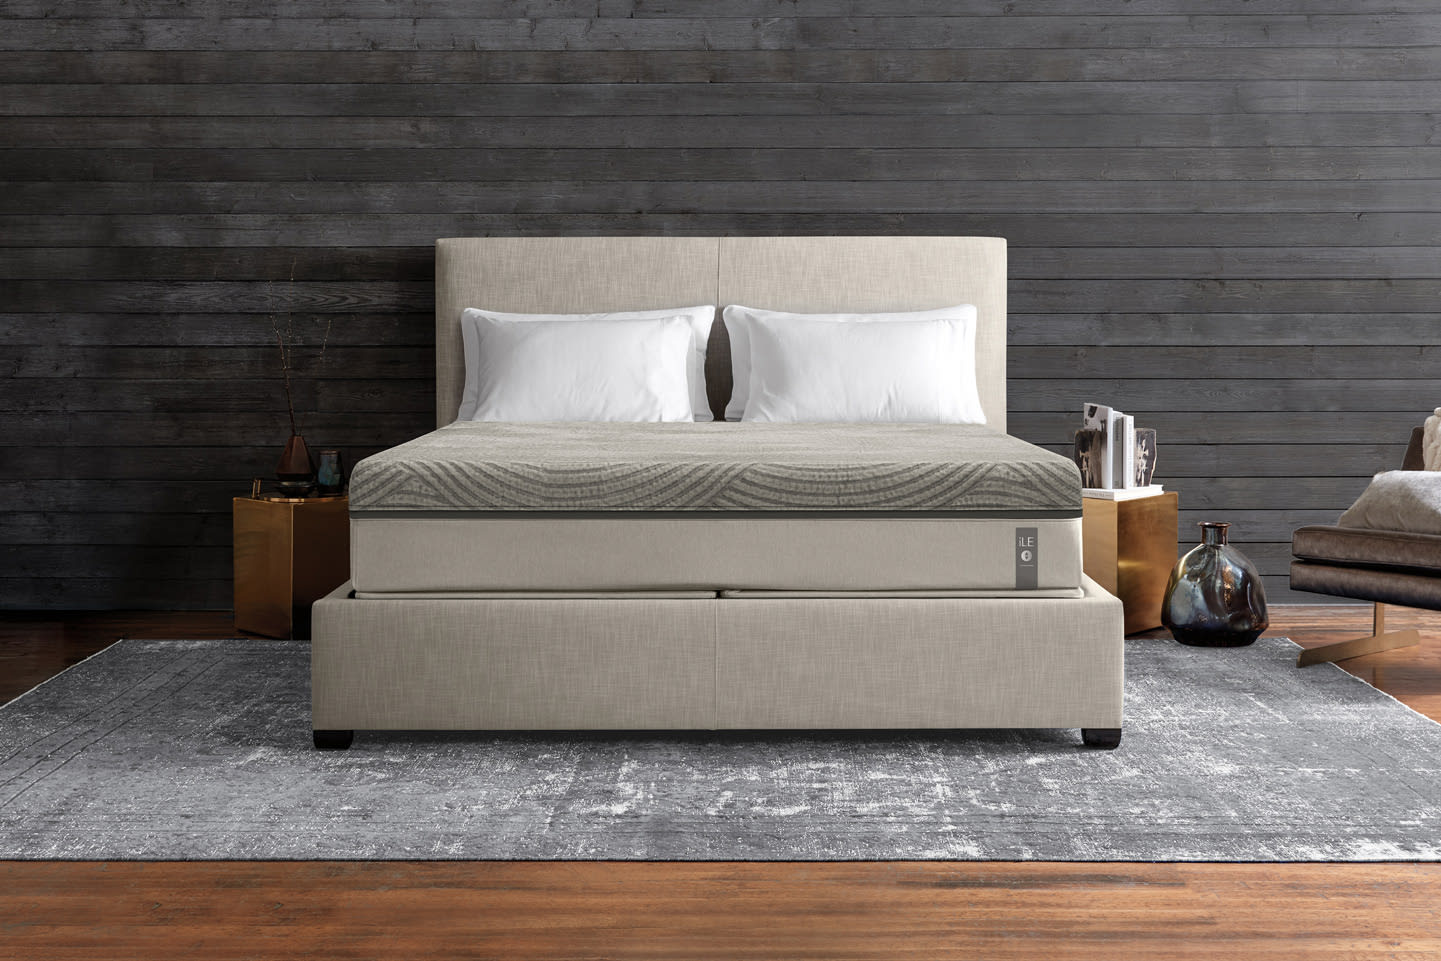 How To Remove A Sleep Number Mattress